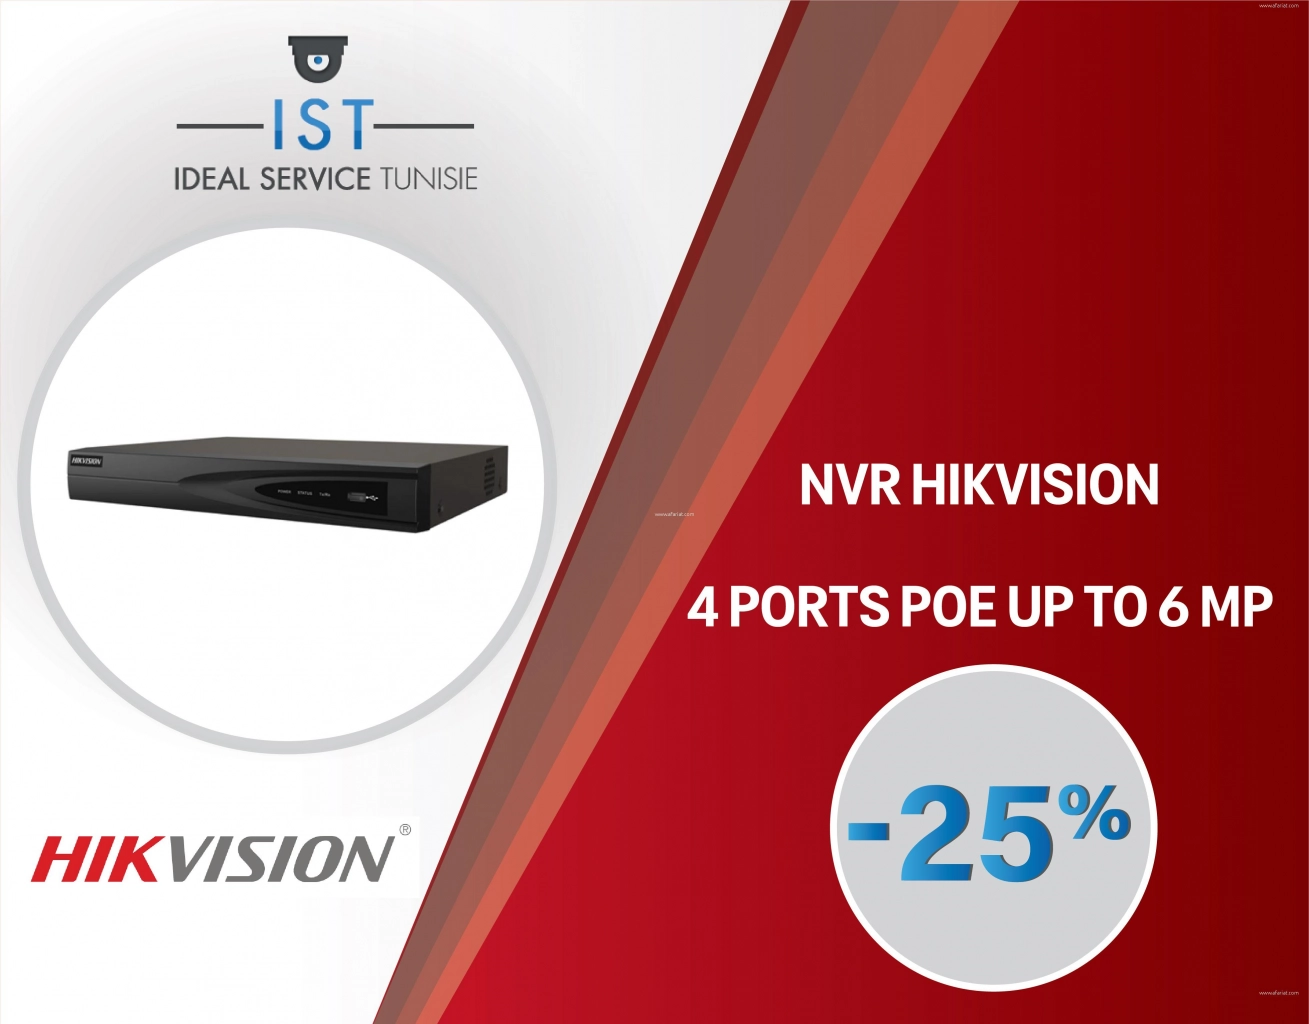 IST: NVR HIKVISION 4 PORTS POE UP TO 6MP